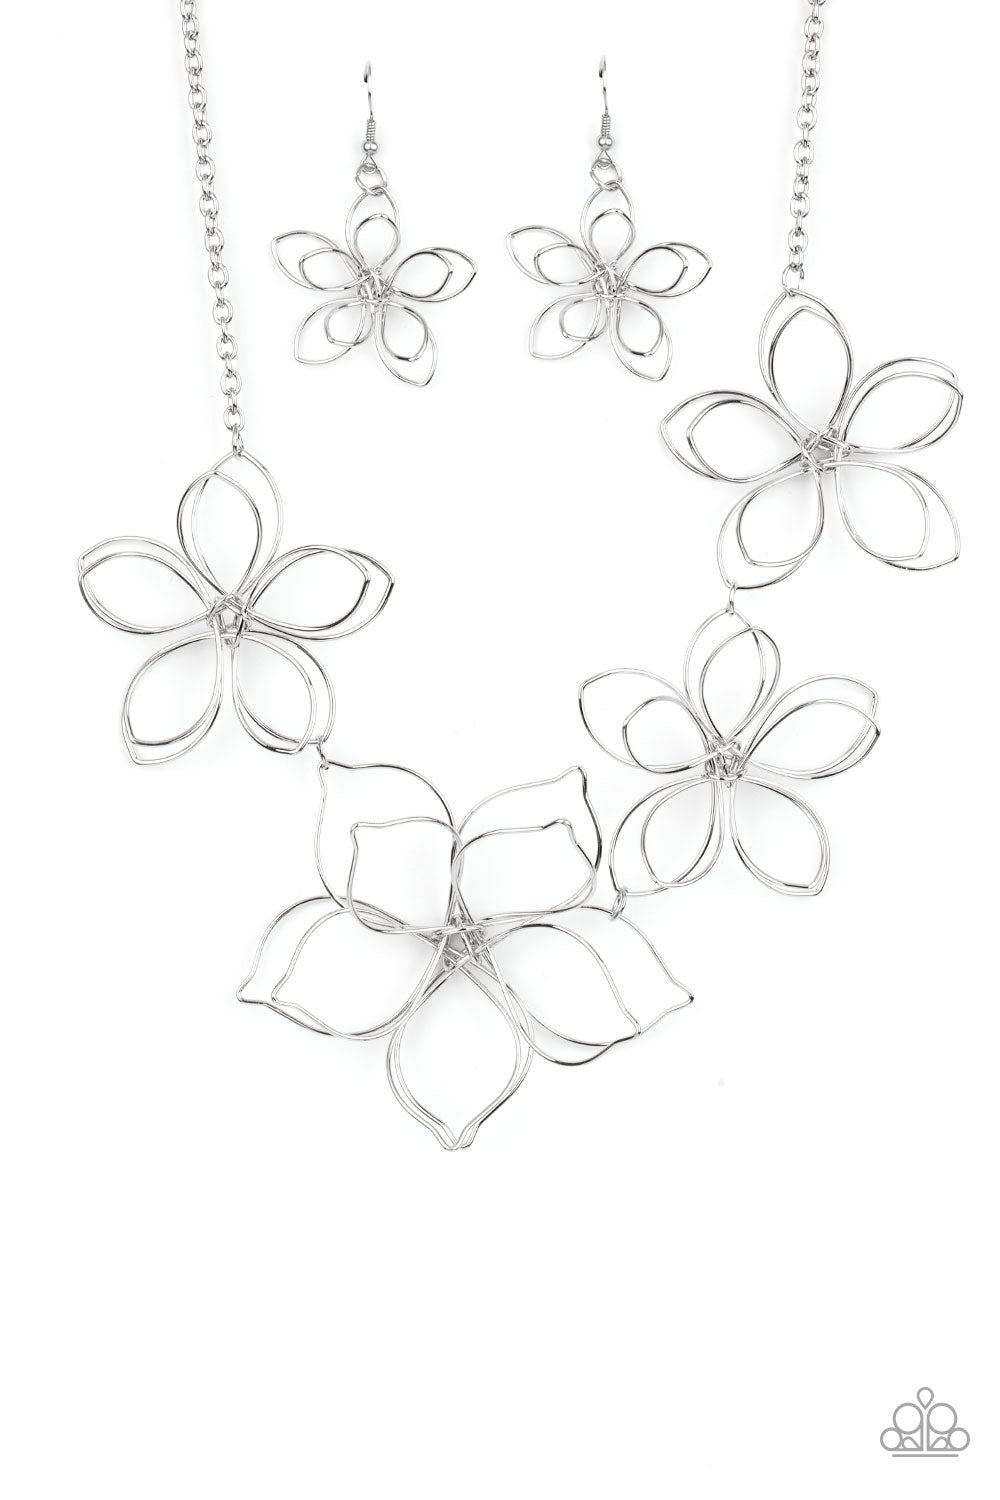 Flower Garden Fashionista - Large Blossoms - Silver Flower Necklace - Paparazzi Accessories - Bejeweled Accessories By Kristie - Shiny silver wire delicately twists into oversized blossoms. Varying in size, the airy floral frames delicately link into an asymmetrical display as the layered frames elegantly pop beneath the collar. Features an adjustable clasp closure. Sold as one individual necklace.